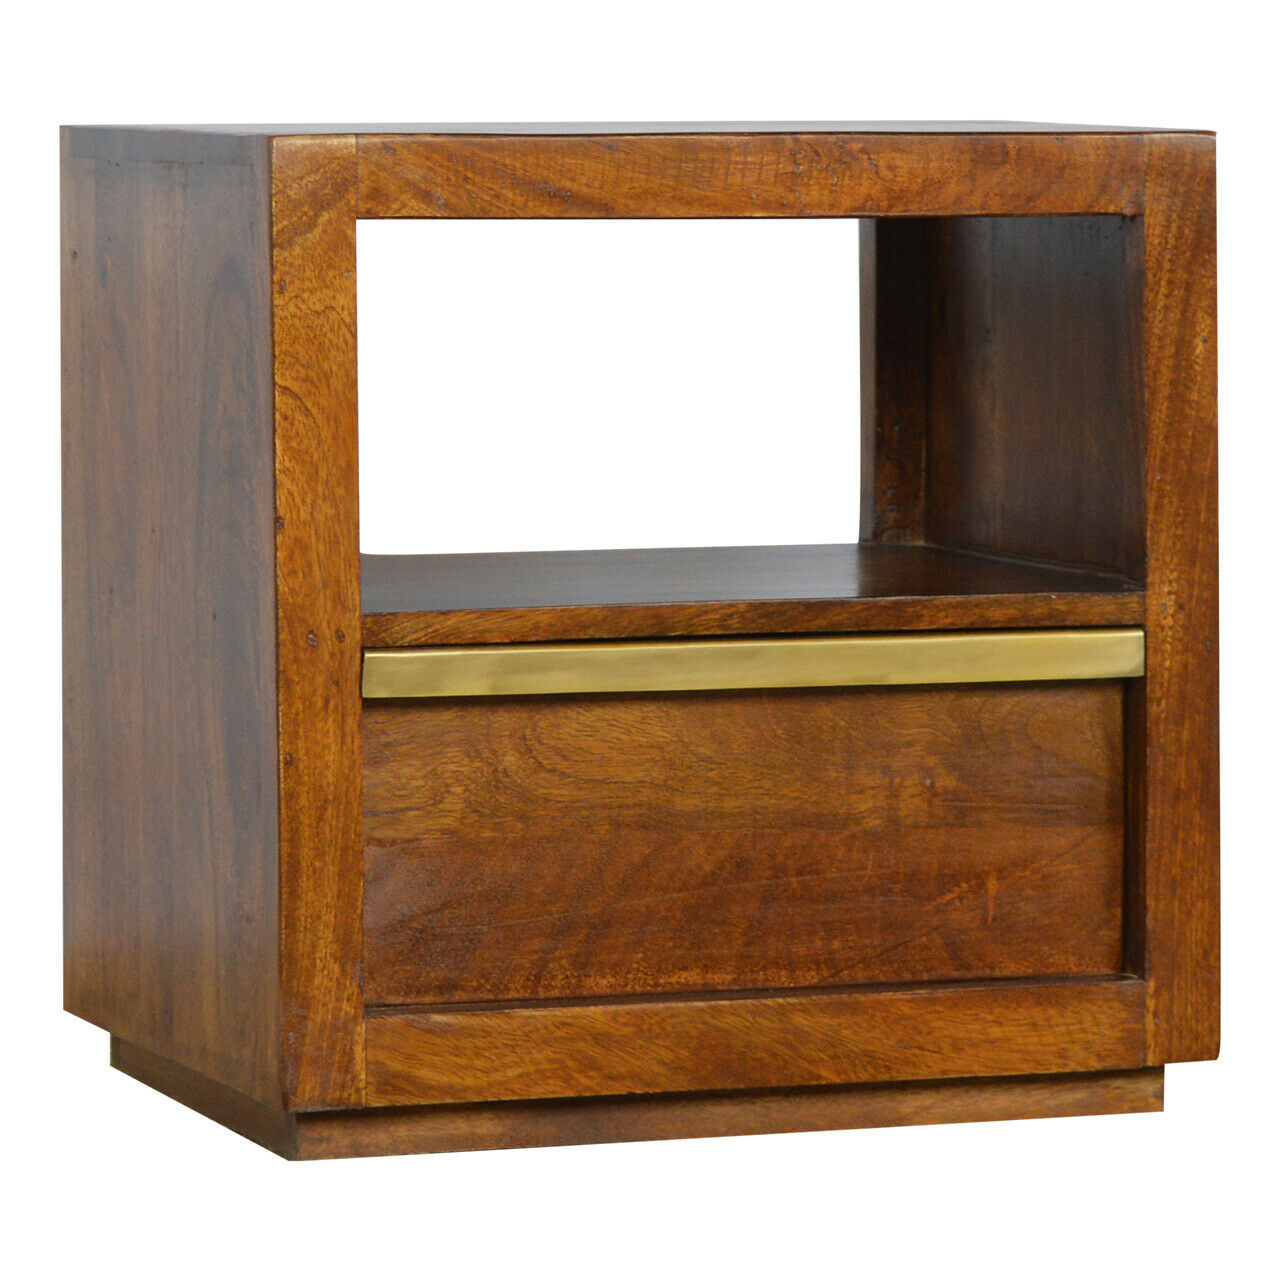 Solid Wood Gold Bar Chesnut Bedside with Drawer